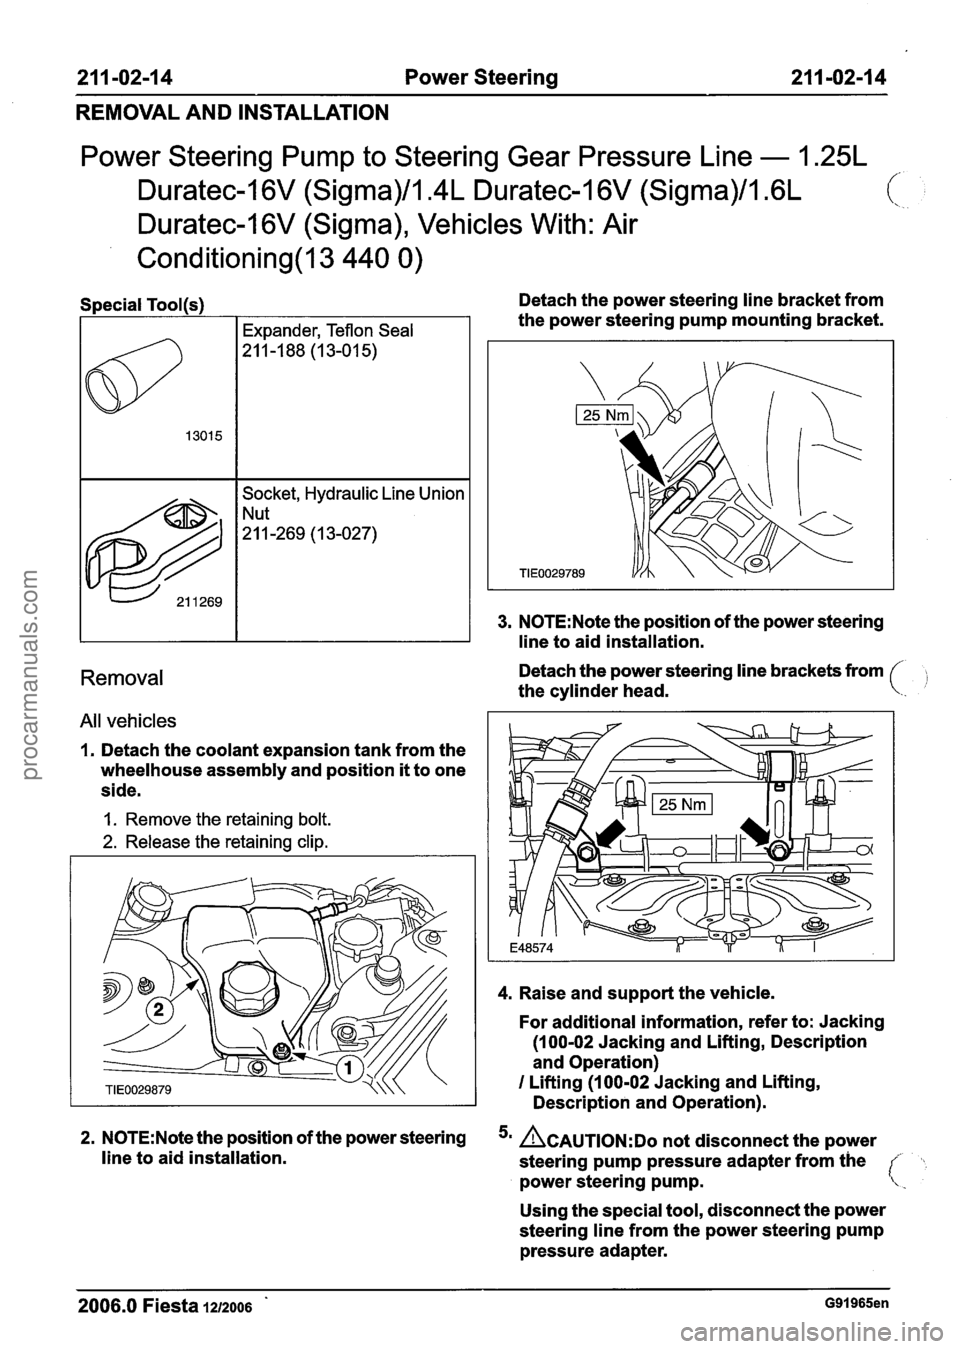 FORD FIESTA 2007  Workshop Manual 
21 1 -02-1 4 Power Steering 21 1 -02-1 4 
REMOVAL  AND INSTALLATION 
Power  Steering  Pump to Steering  Gear Pressure Line - 1.25L 
Duratec-1 6V (Sigma),  Vehicles With:  Air 
Conditioning(13 440 0) 